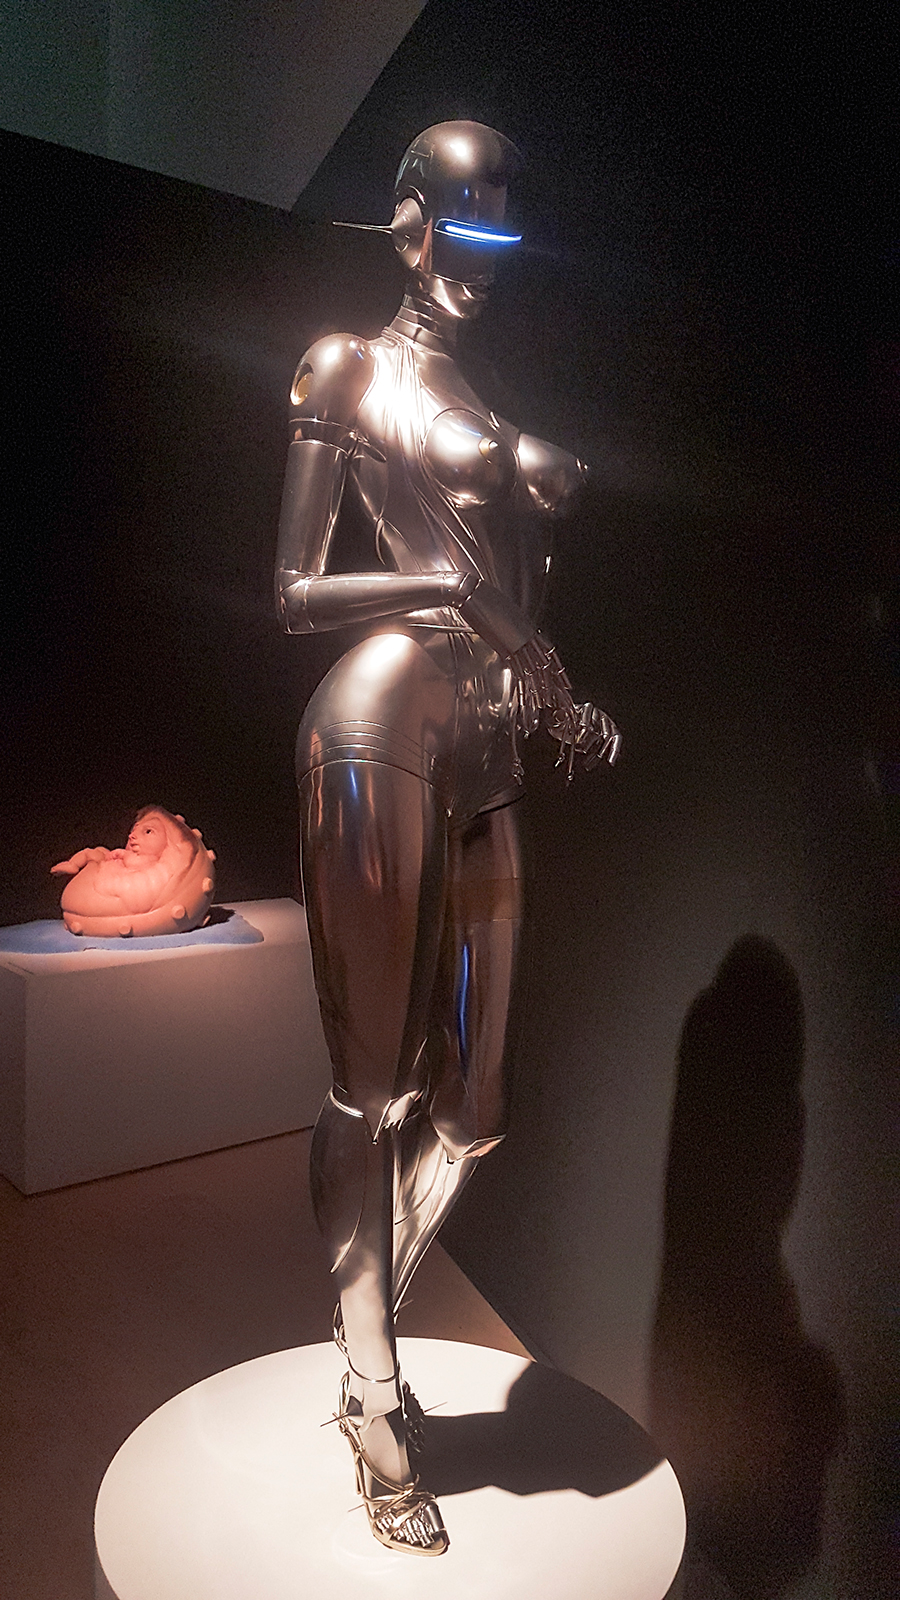 Sexy Robot by Hajime Sorayama at the The Universe and Art: An Artistic Voyage Through Space exhibition, ArtScience Museum Singapore.